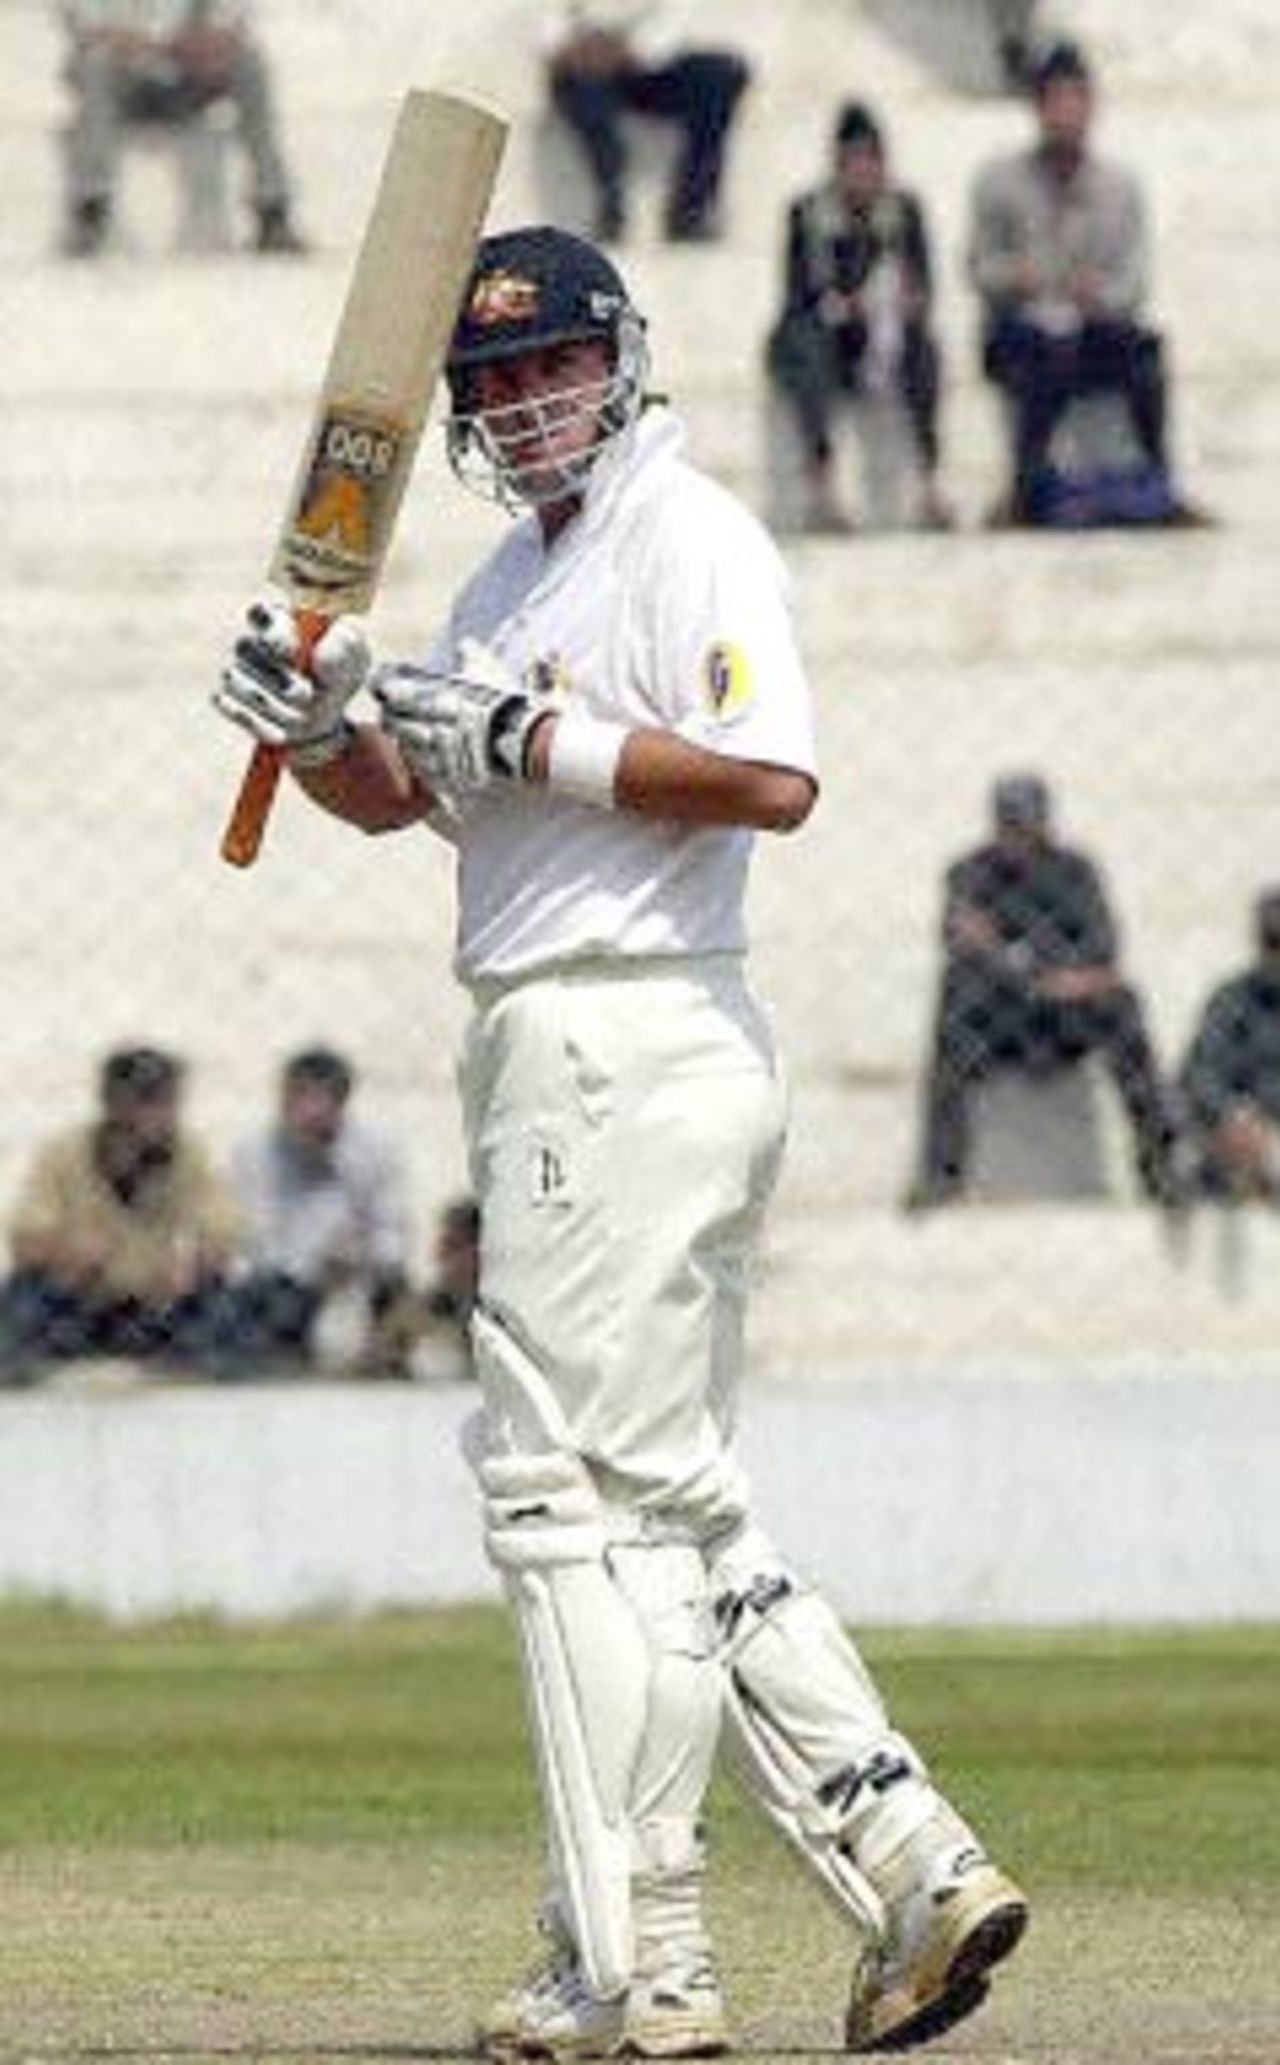 Australian batsman Mark Waugh acknowledges the crowd by raising his bat after scoring a half-century during their second innings against Board President's XI in New Delhi 08 March 2001. Australia scored 451 in their first innings with India at 221.